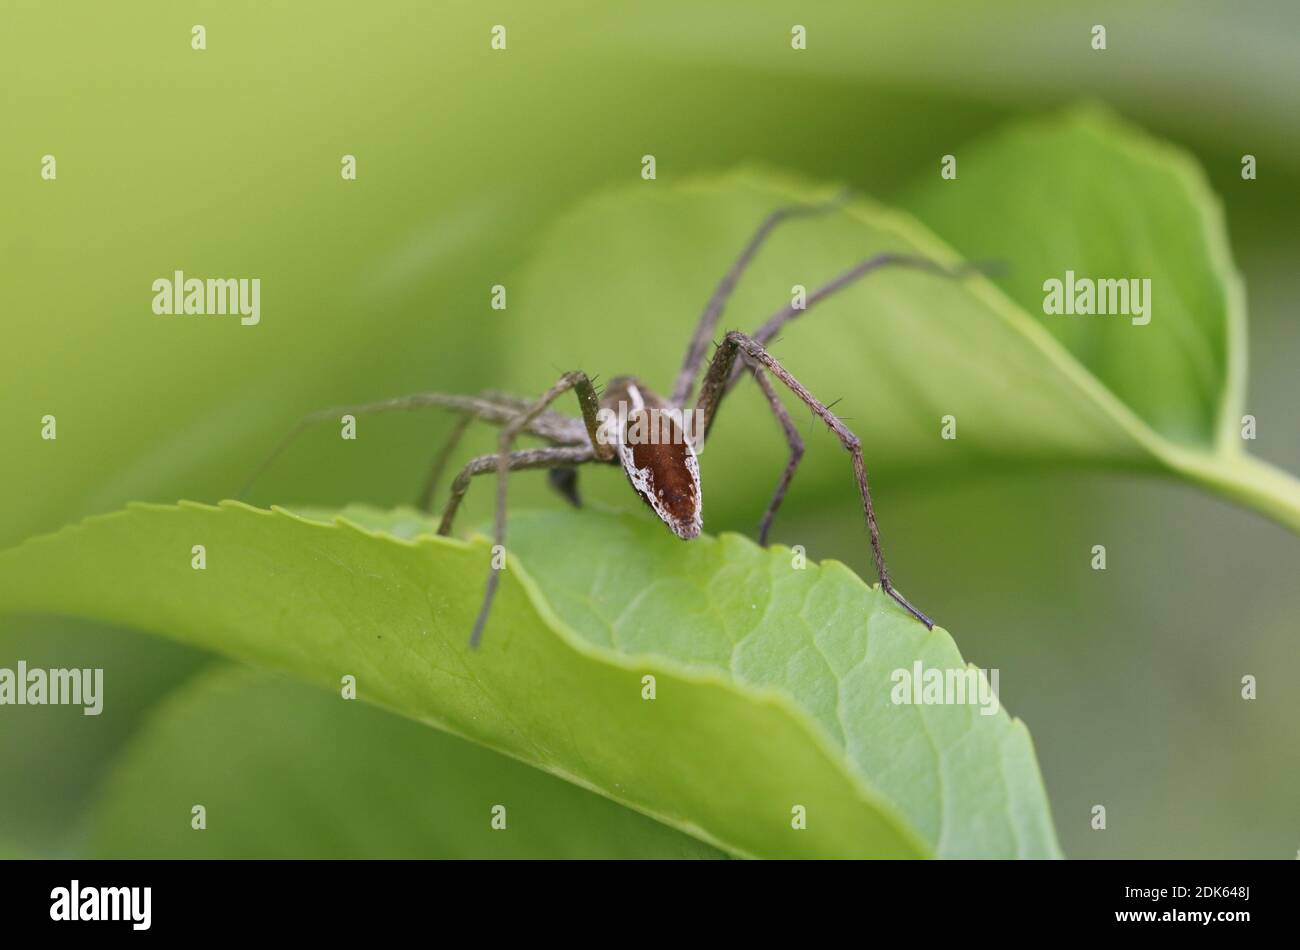 The nursery web spider, Pisaura mirabilis, is a spider species of the family Pisauridae. This picture was taken at a backyard in Genk, Belgium. Stock Photo